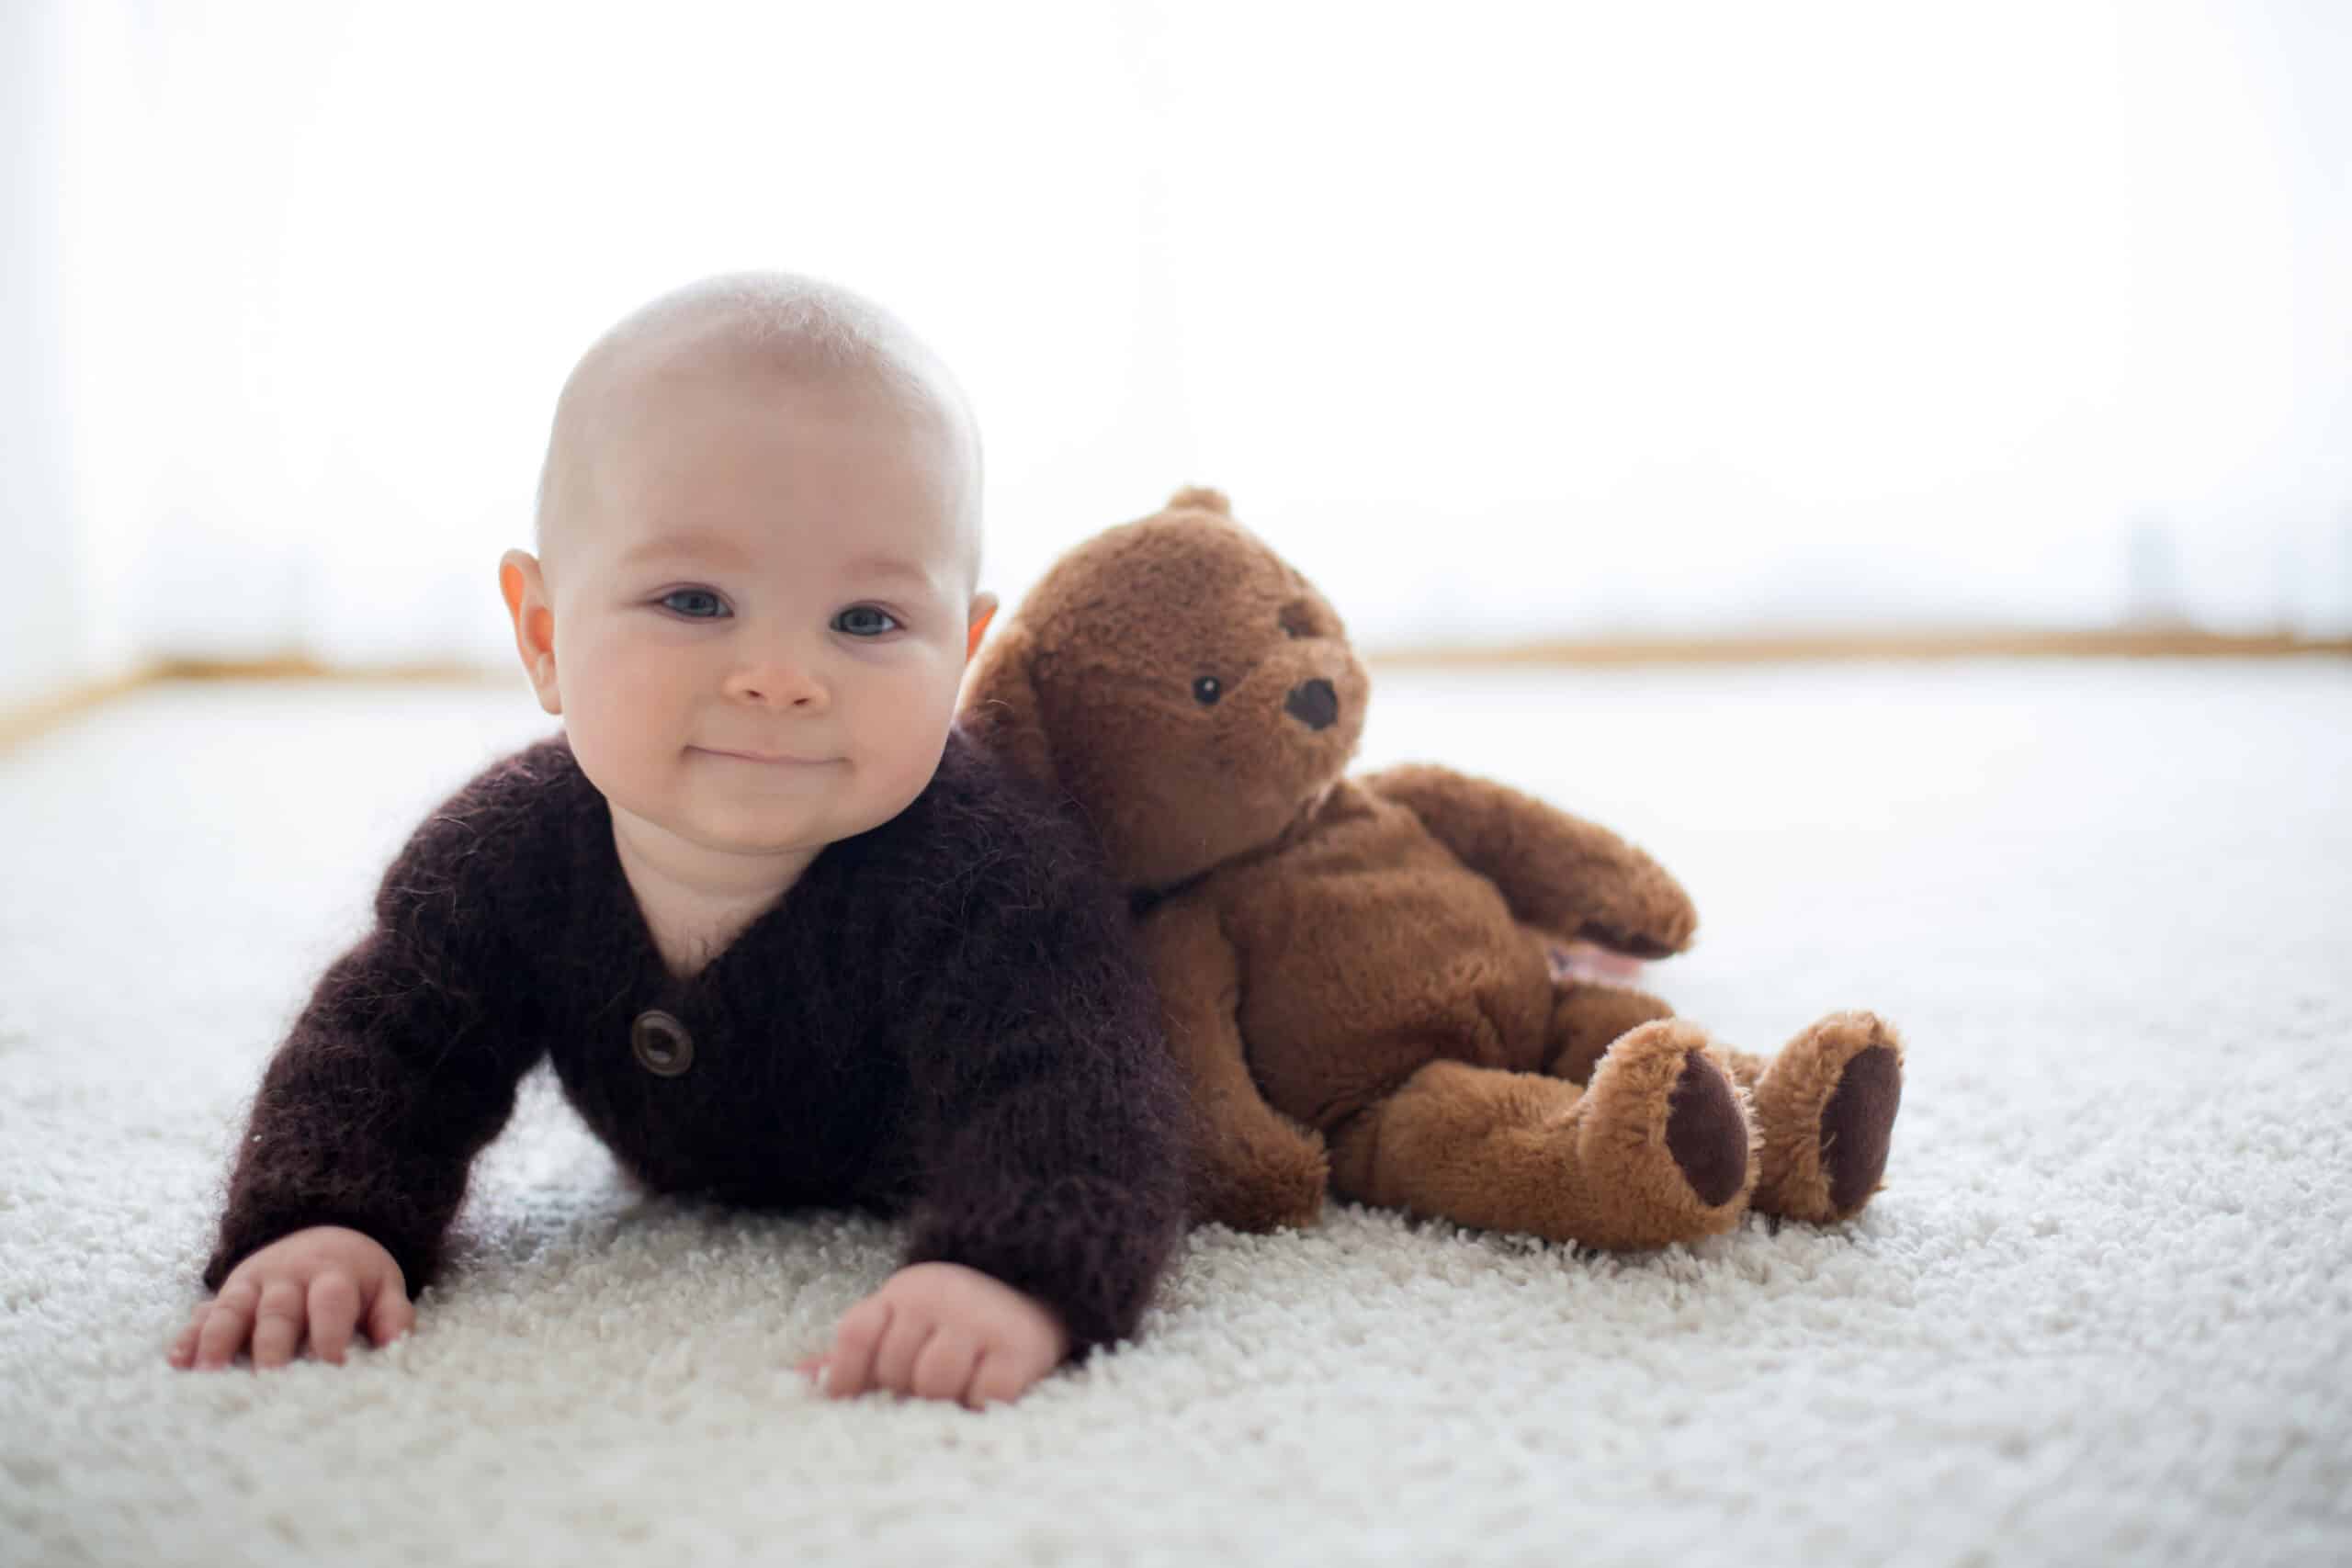 Little cute baby boy, dressed in handmade knitted brown teddy bear overall, playing at home in sunny bedroom